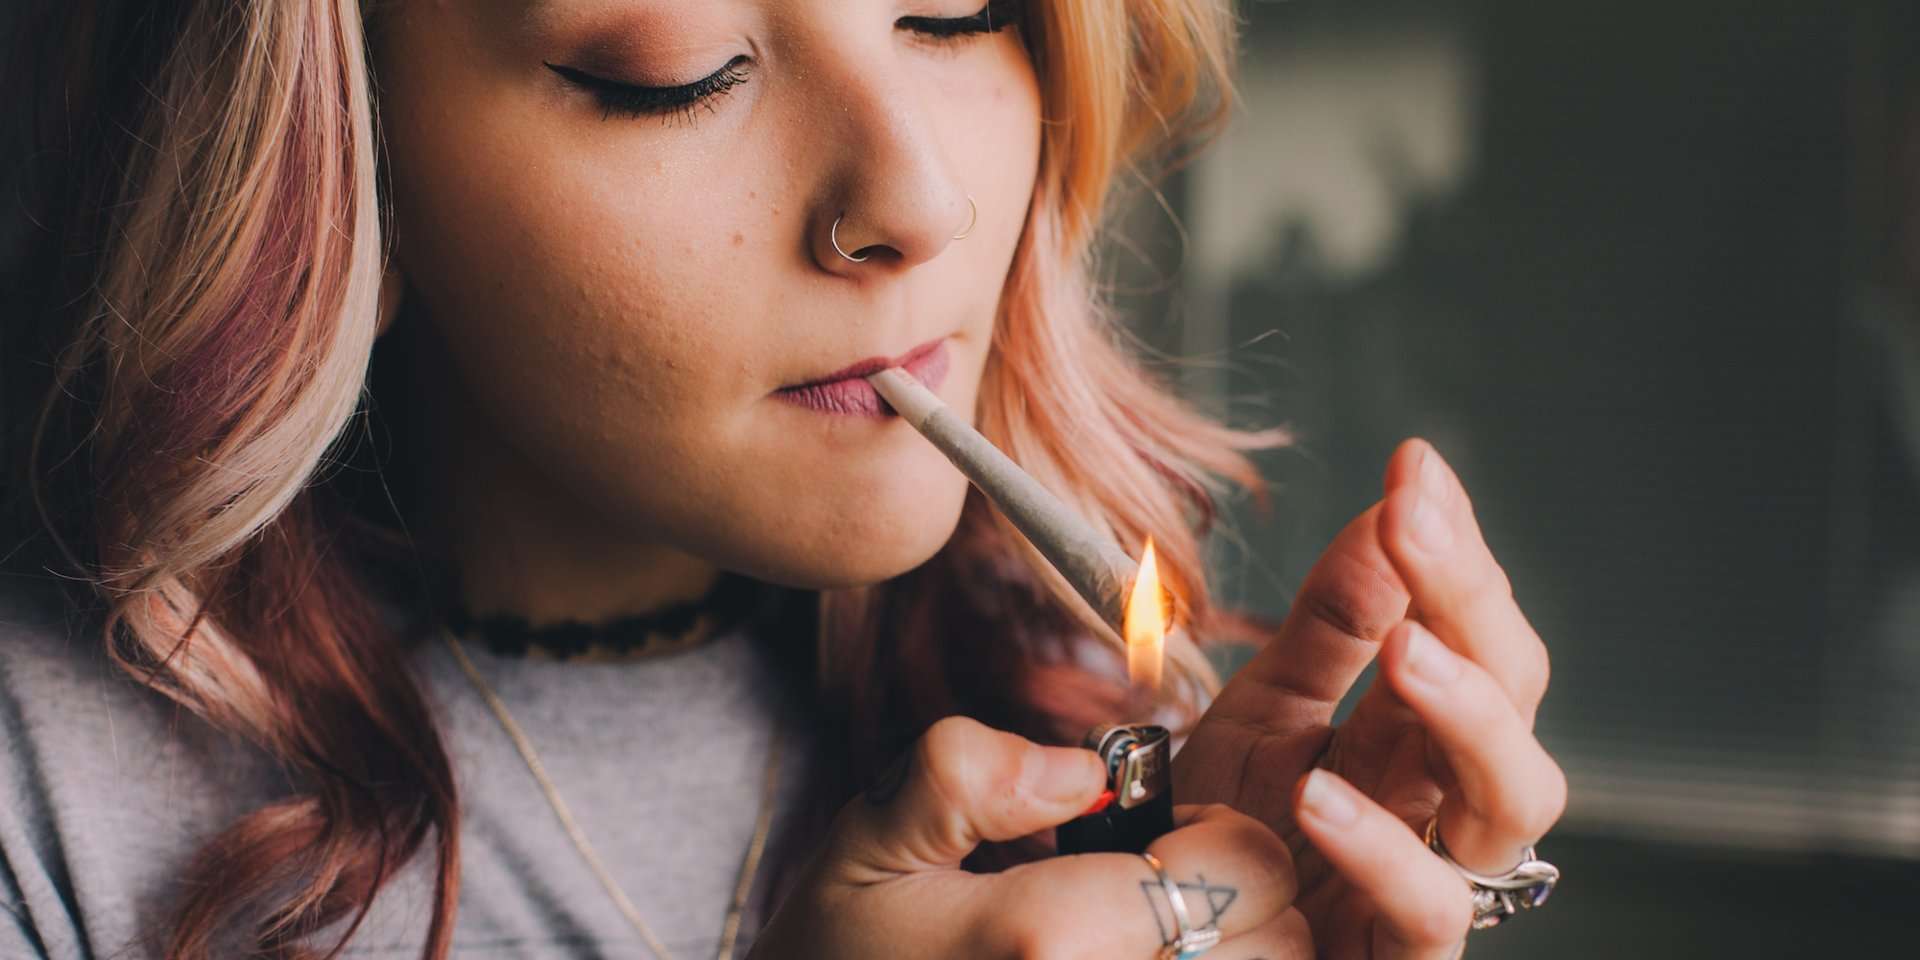 image for 'Women have been saying it works for 10,000 years': 400 women will use marijuana-infused inserts in a groundbreaking study from a Harvard Medical School professor